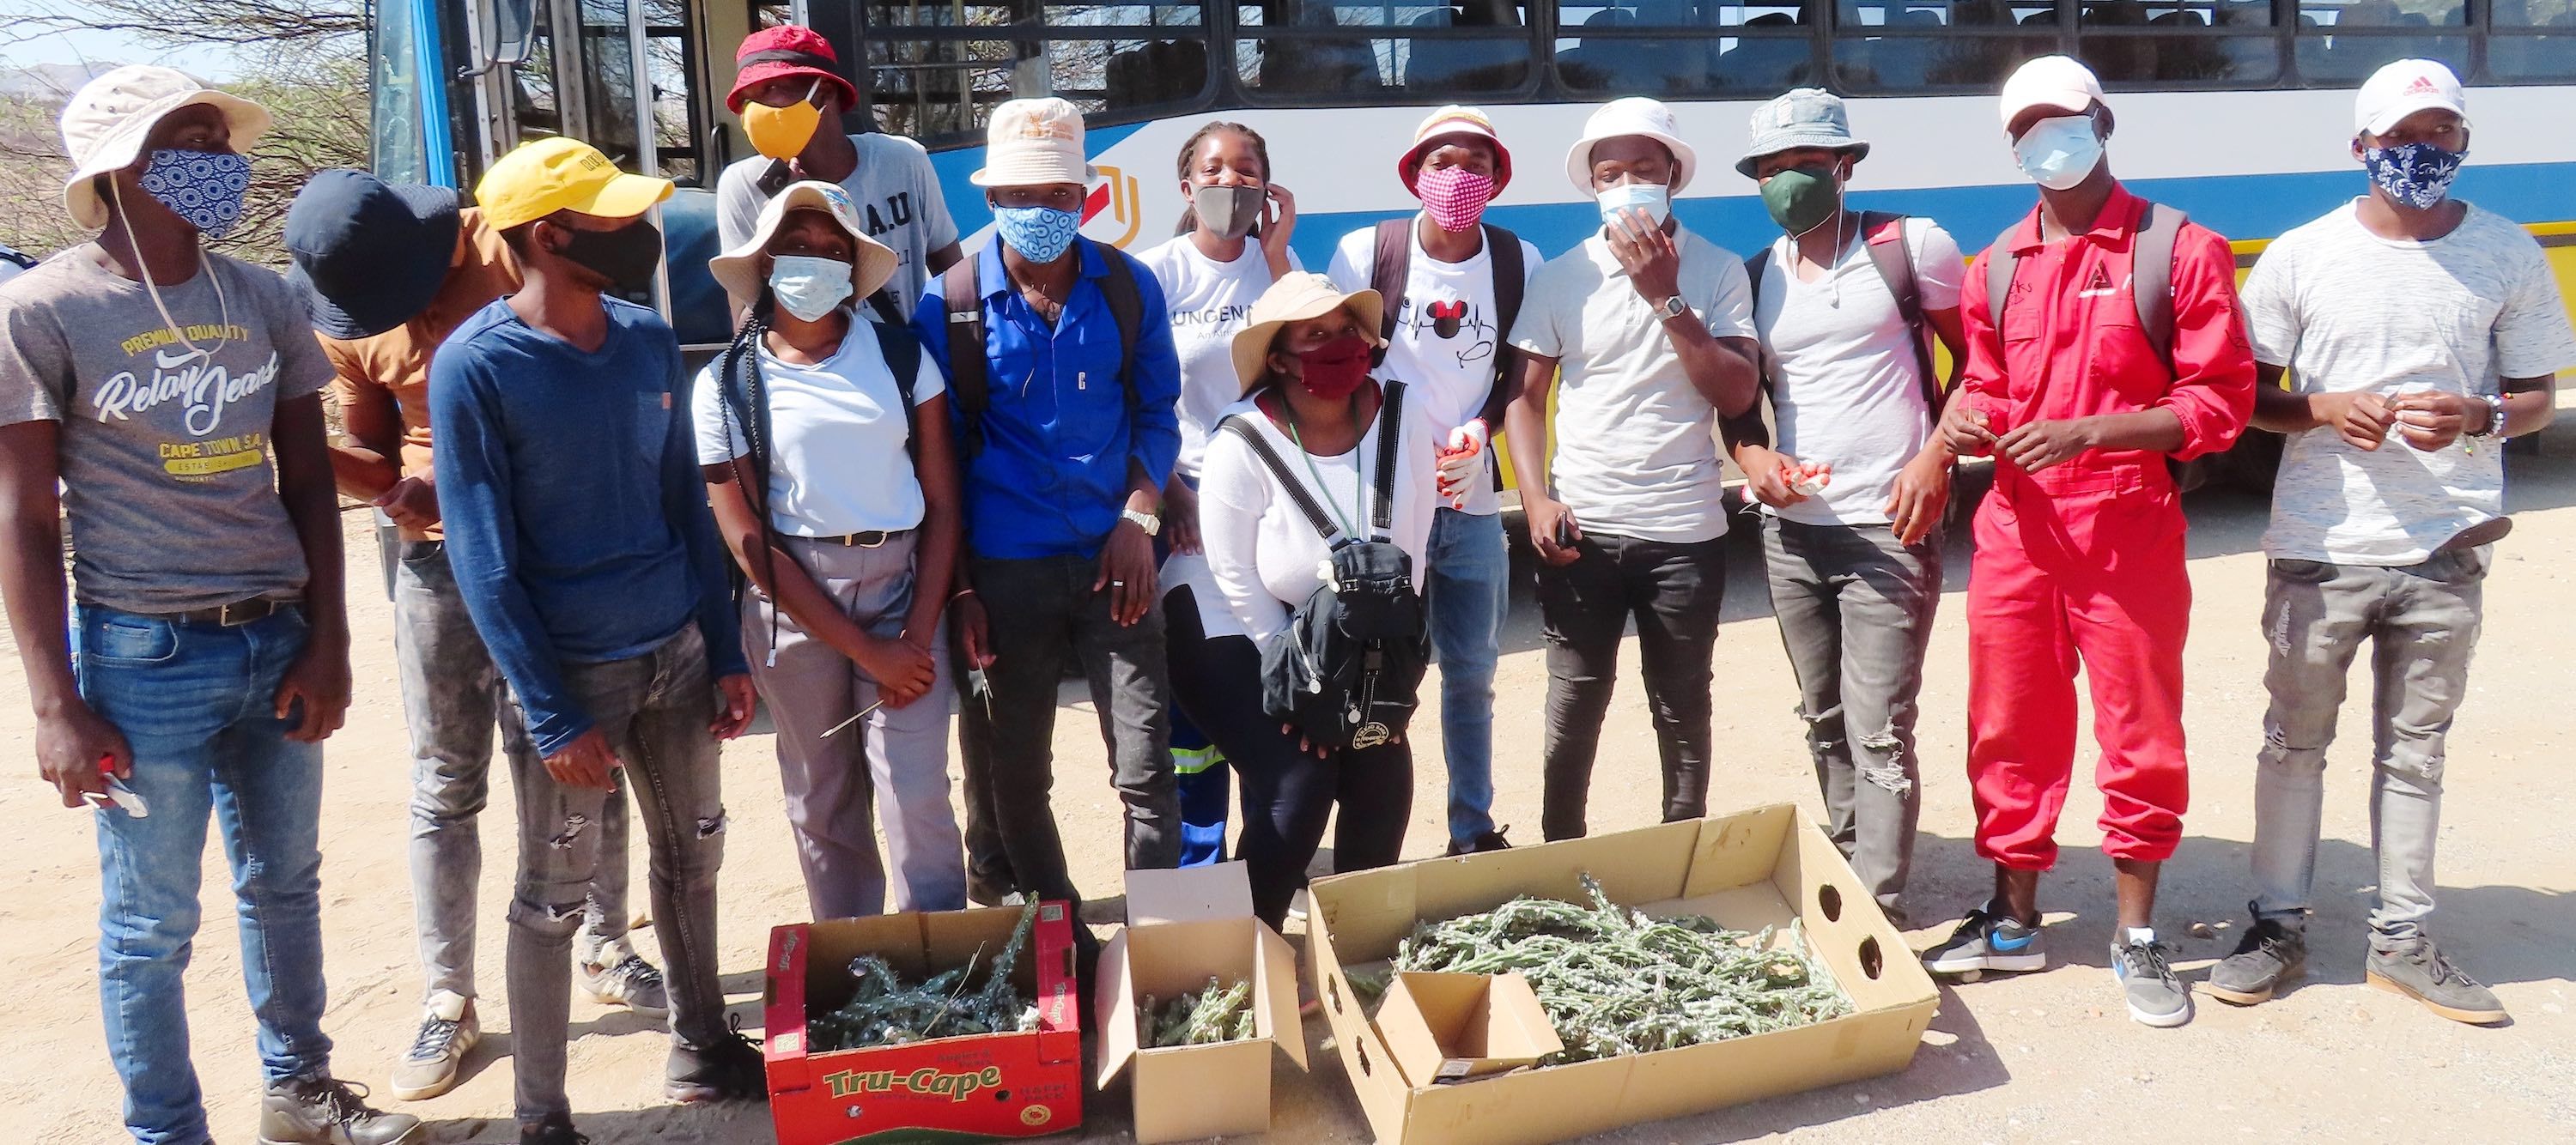 A group of people standing in front of a coach, with boxes of plant material at their feet.